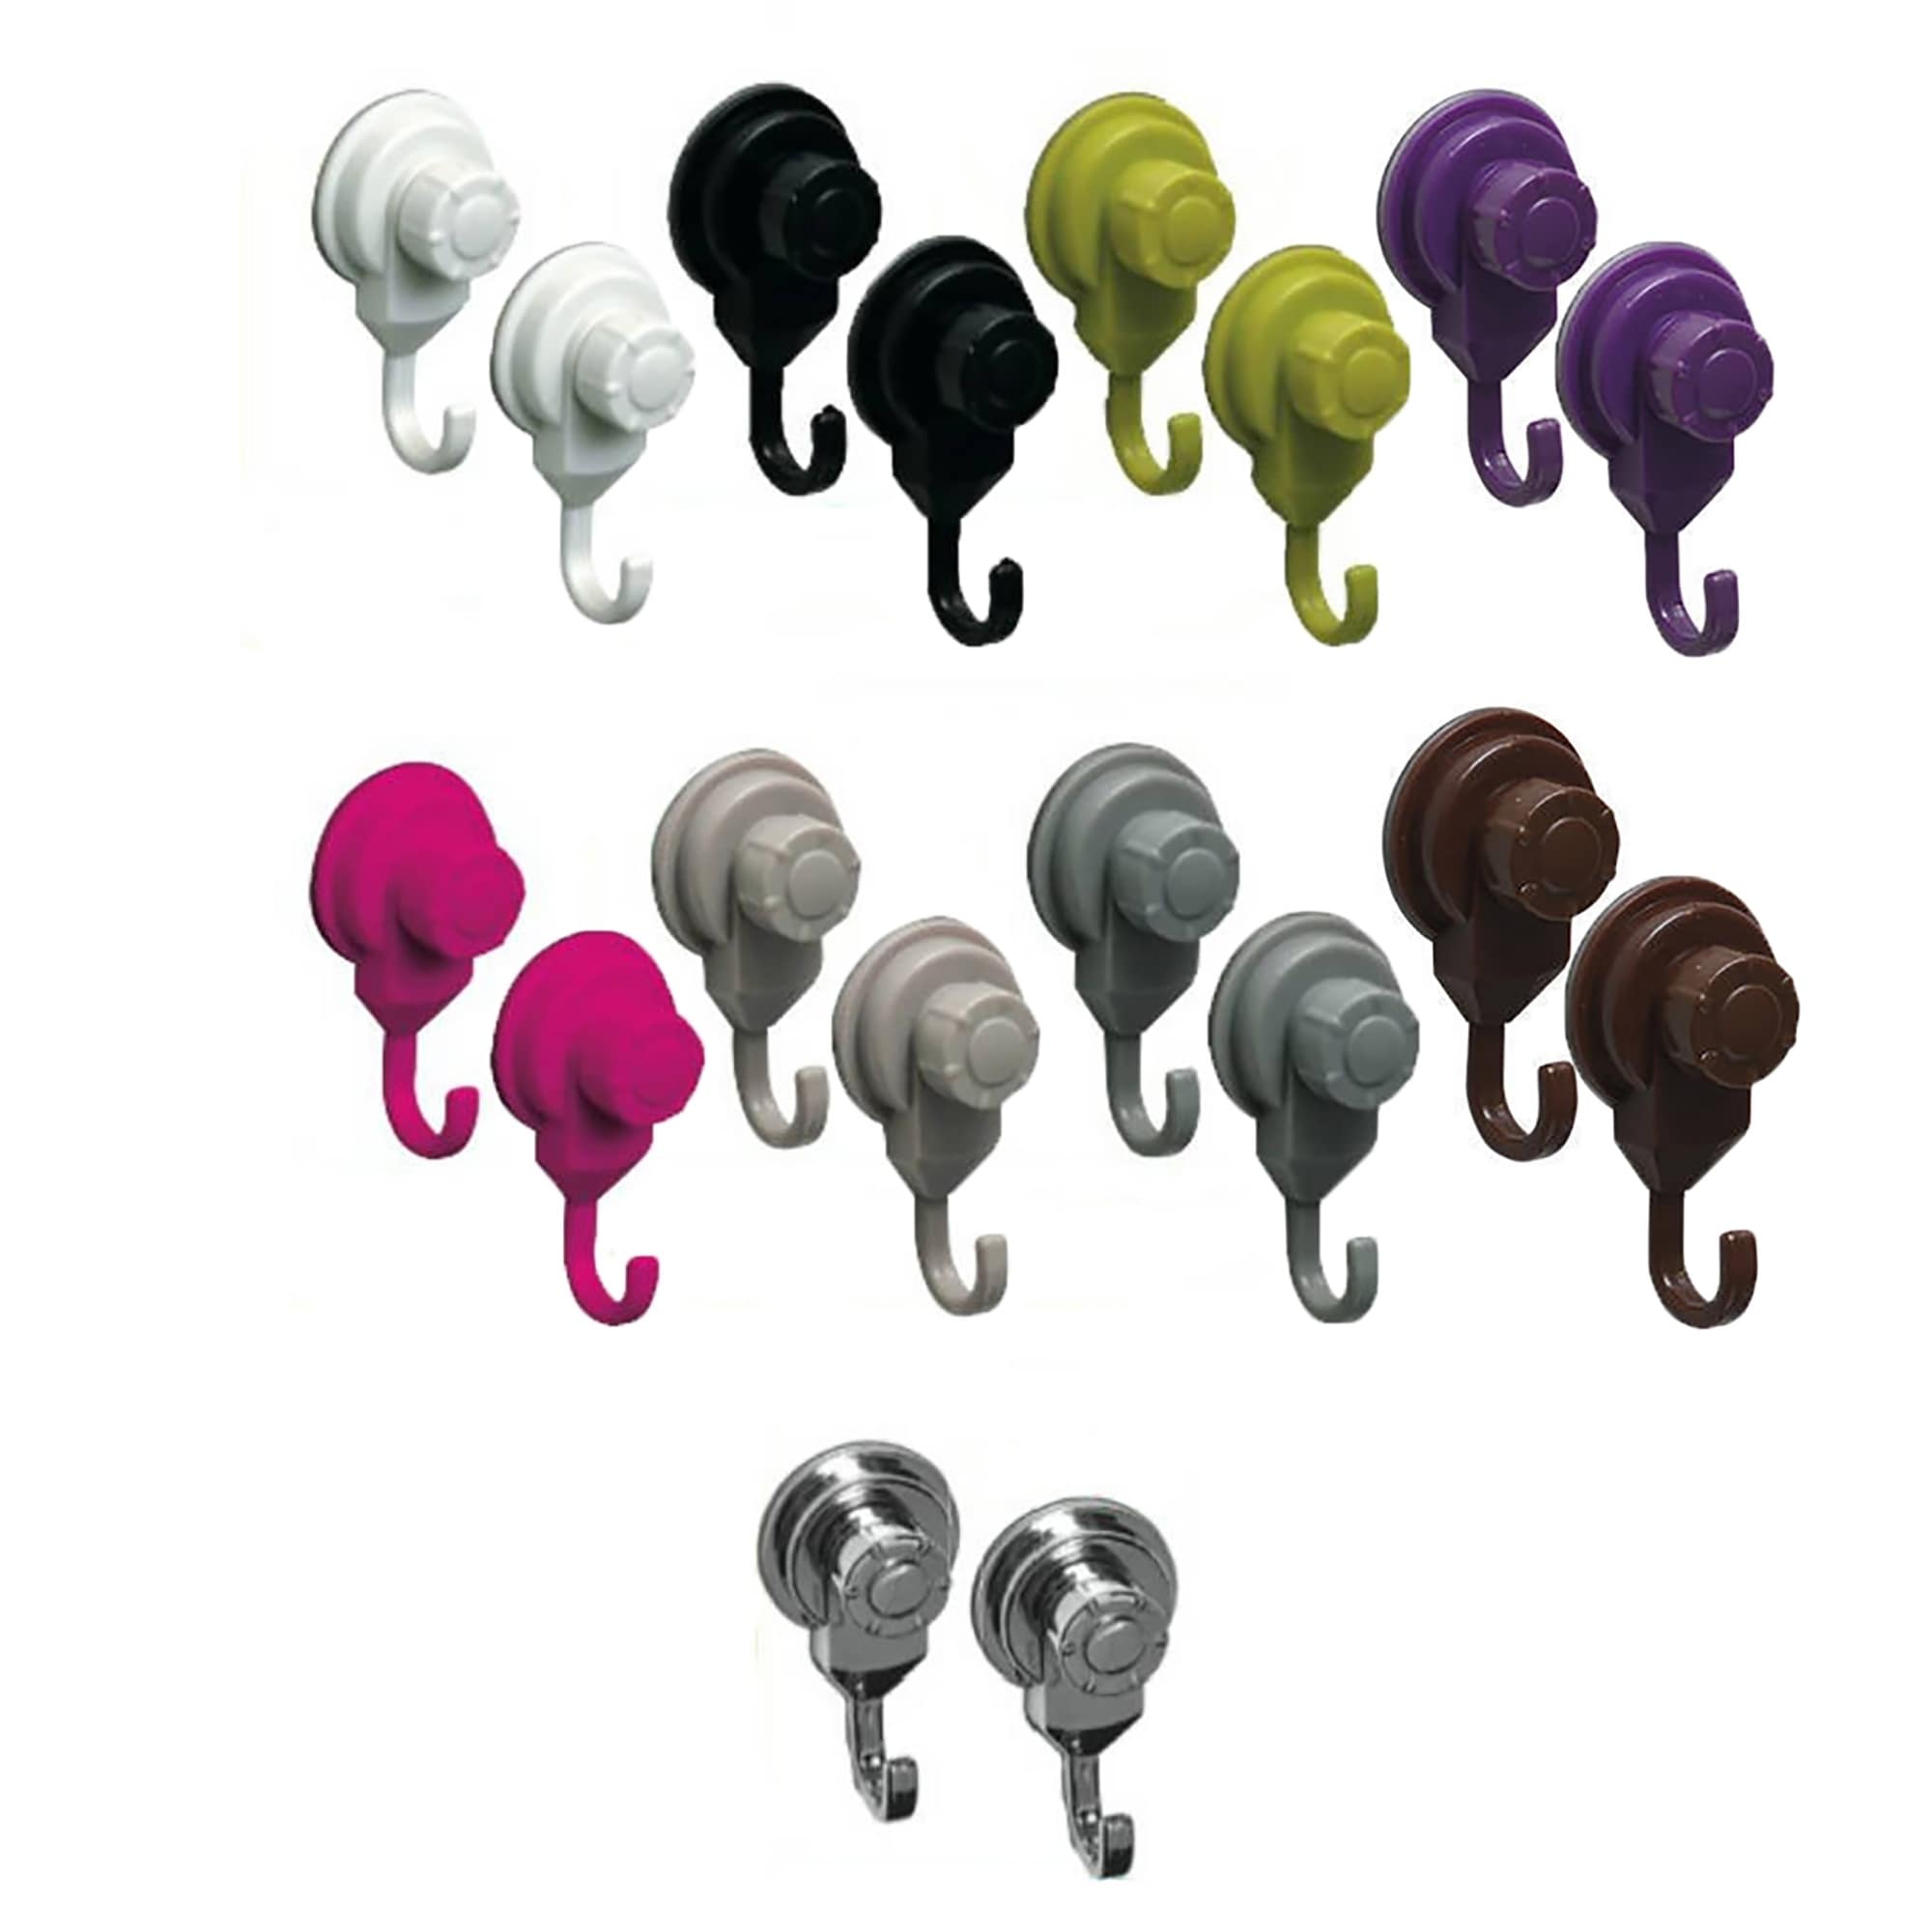 Quntis Suction Cup Hooks 4 Pack Heavy Duty Bathroom Shower Vacuum Home Kitchen Wall Door Suction Hooks Hanger for Towel Loofah Sponge Robe Cloth Wreath Key Bags Clear 